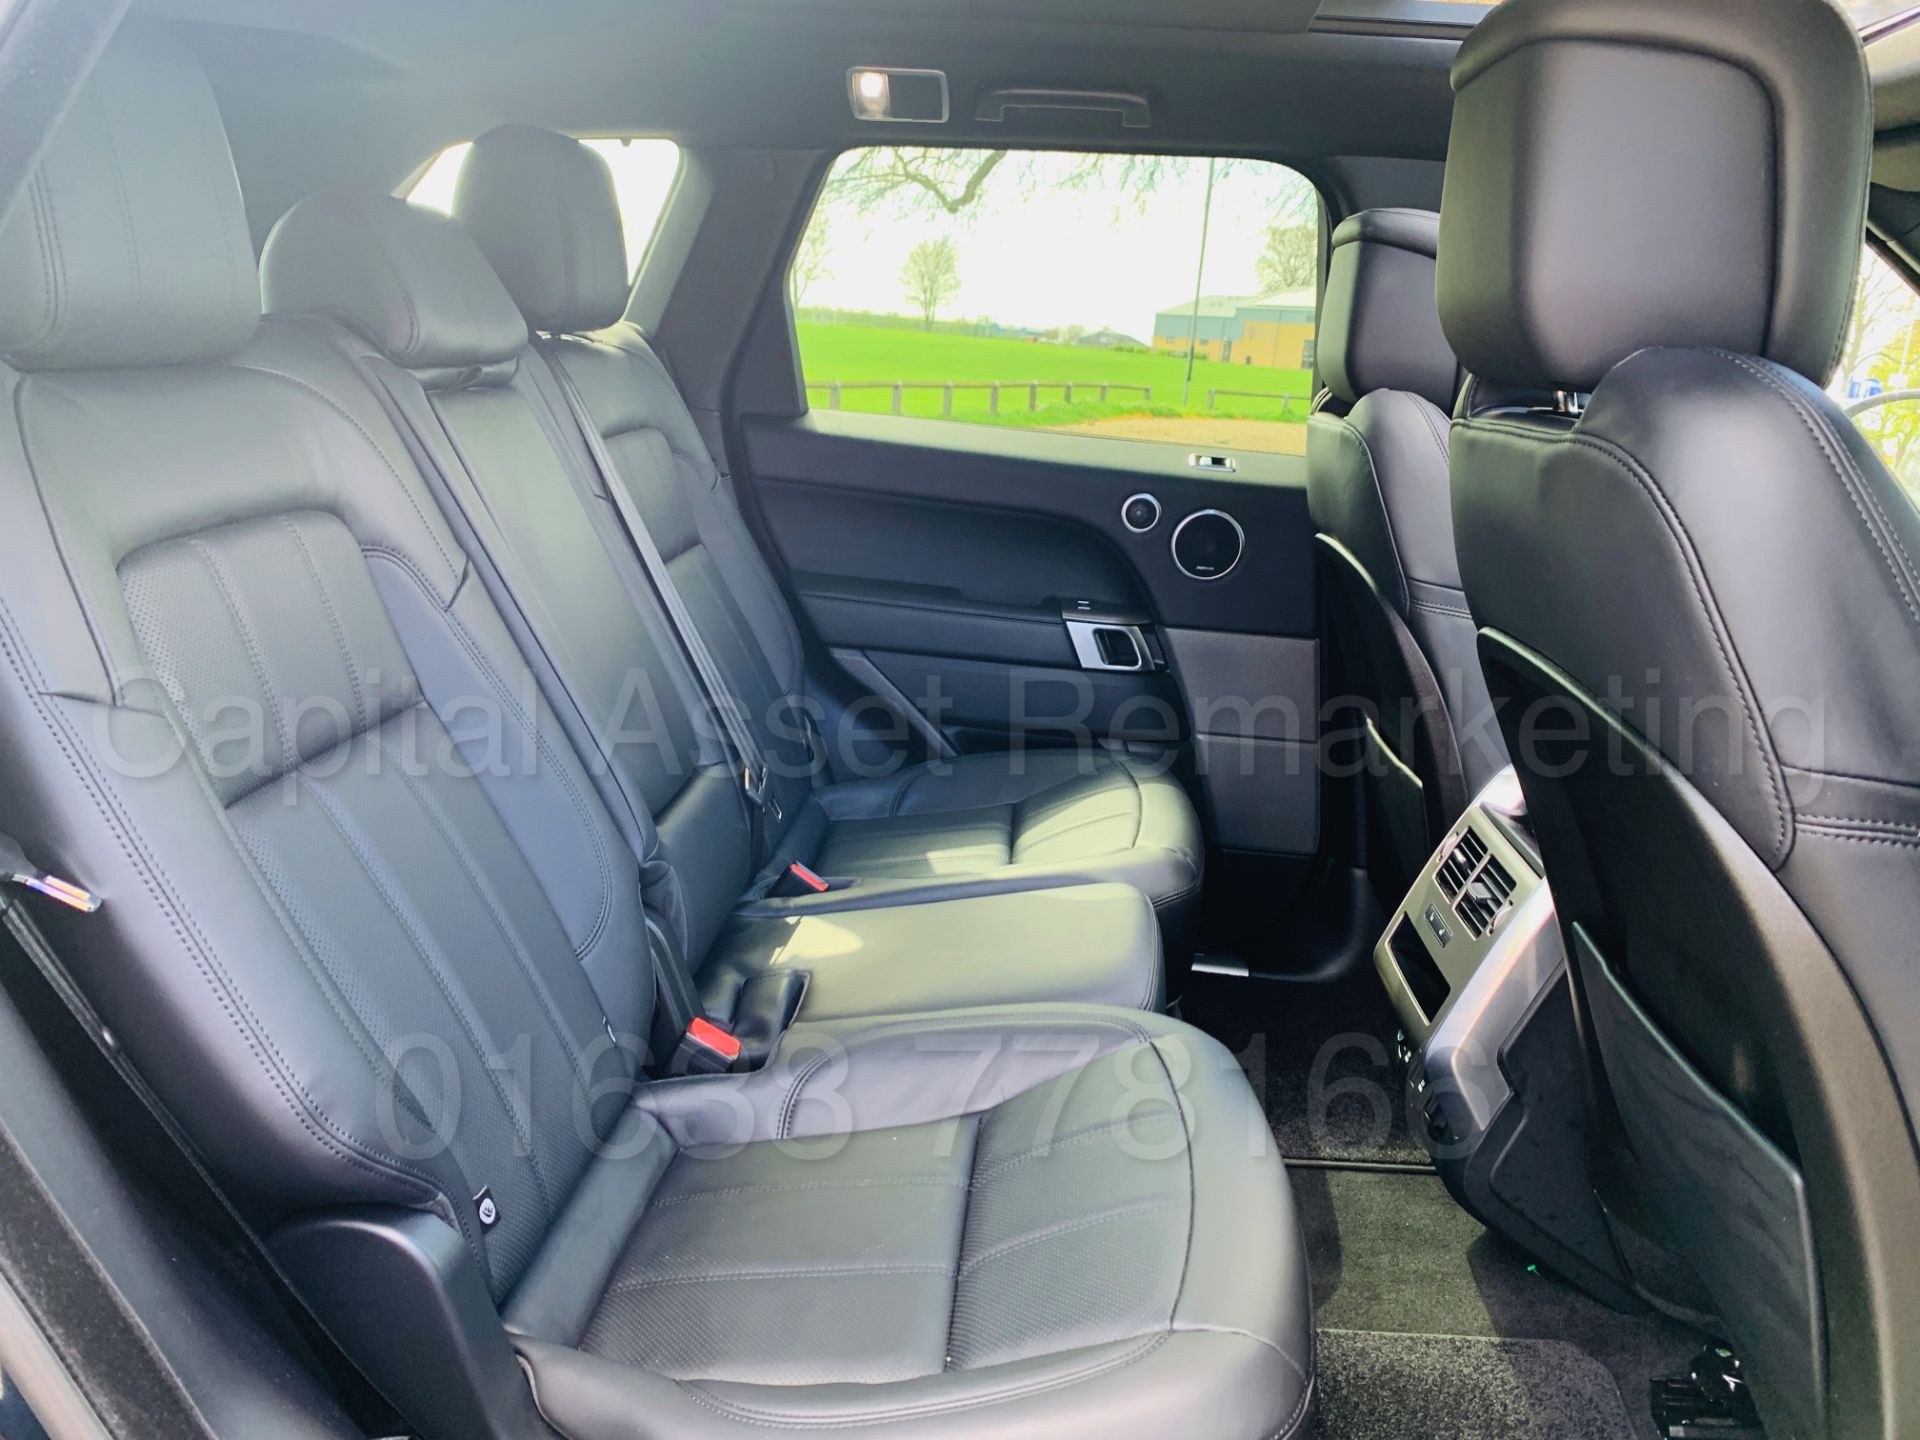 (ON SALE) RANGE ROVER SPORT *HSE* (2019 - ALL NEW MODEL) '3.0 SDV6 - 306 BHP - 8 SPEED AUTO' - Image 38 of 73